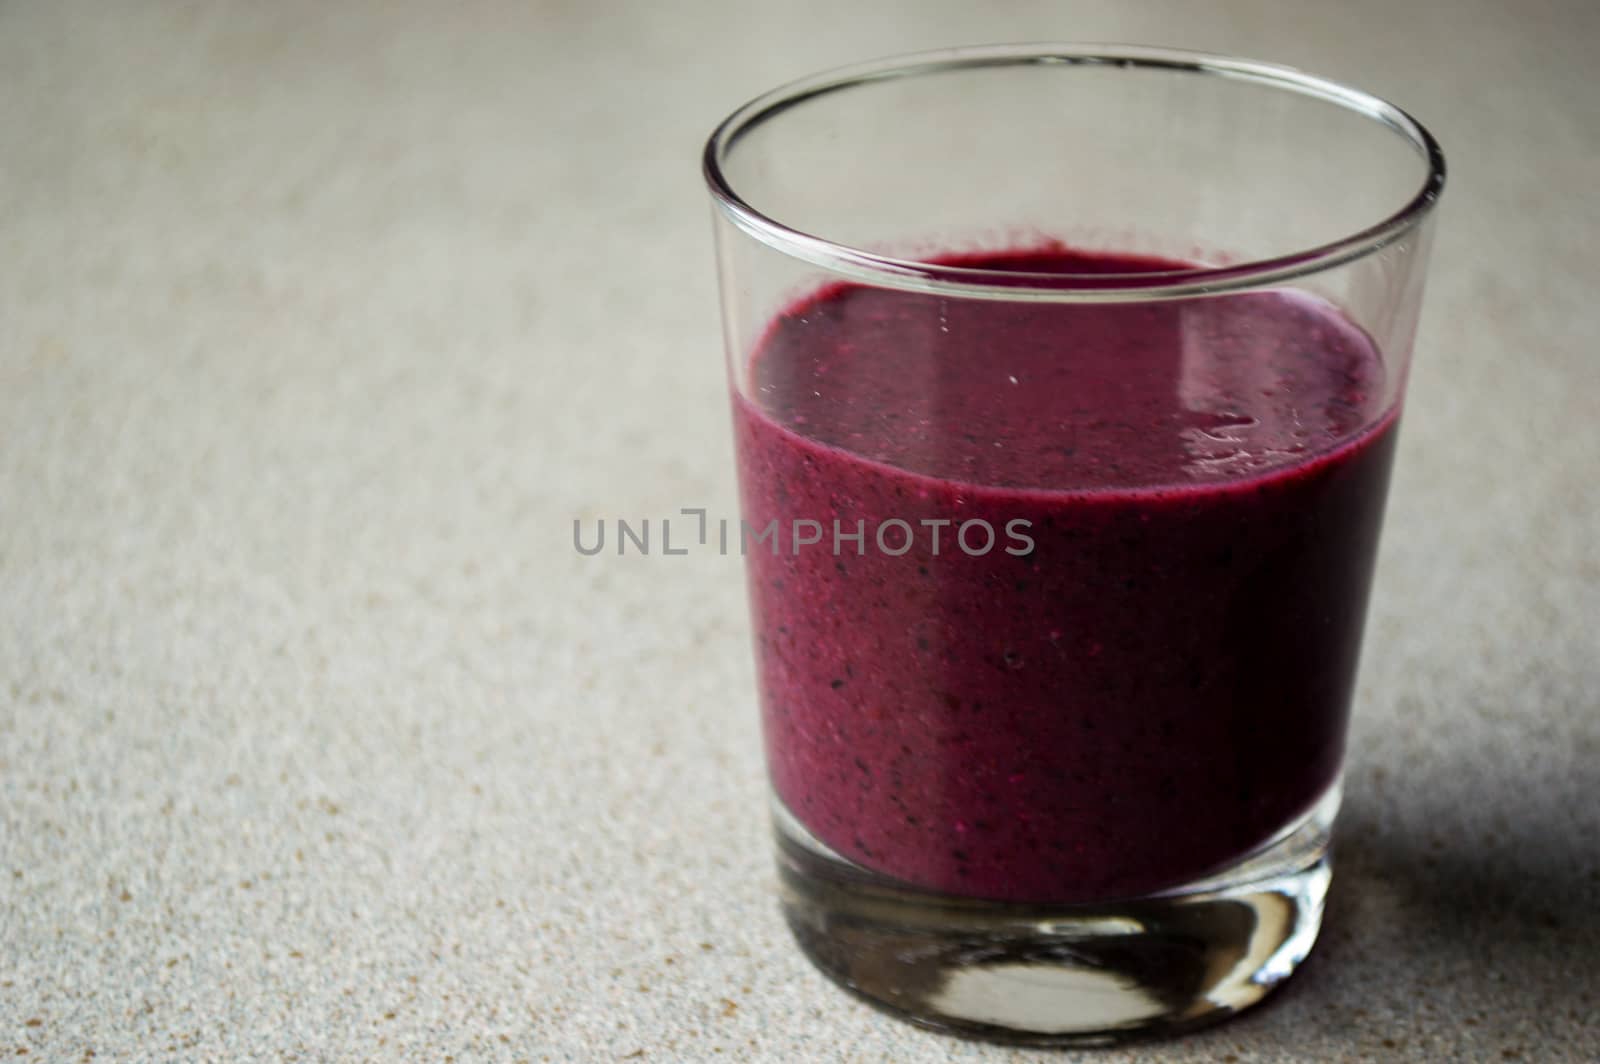 Purple smoothie with berries and fruit in glass on a grey table.